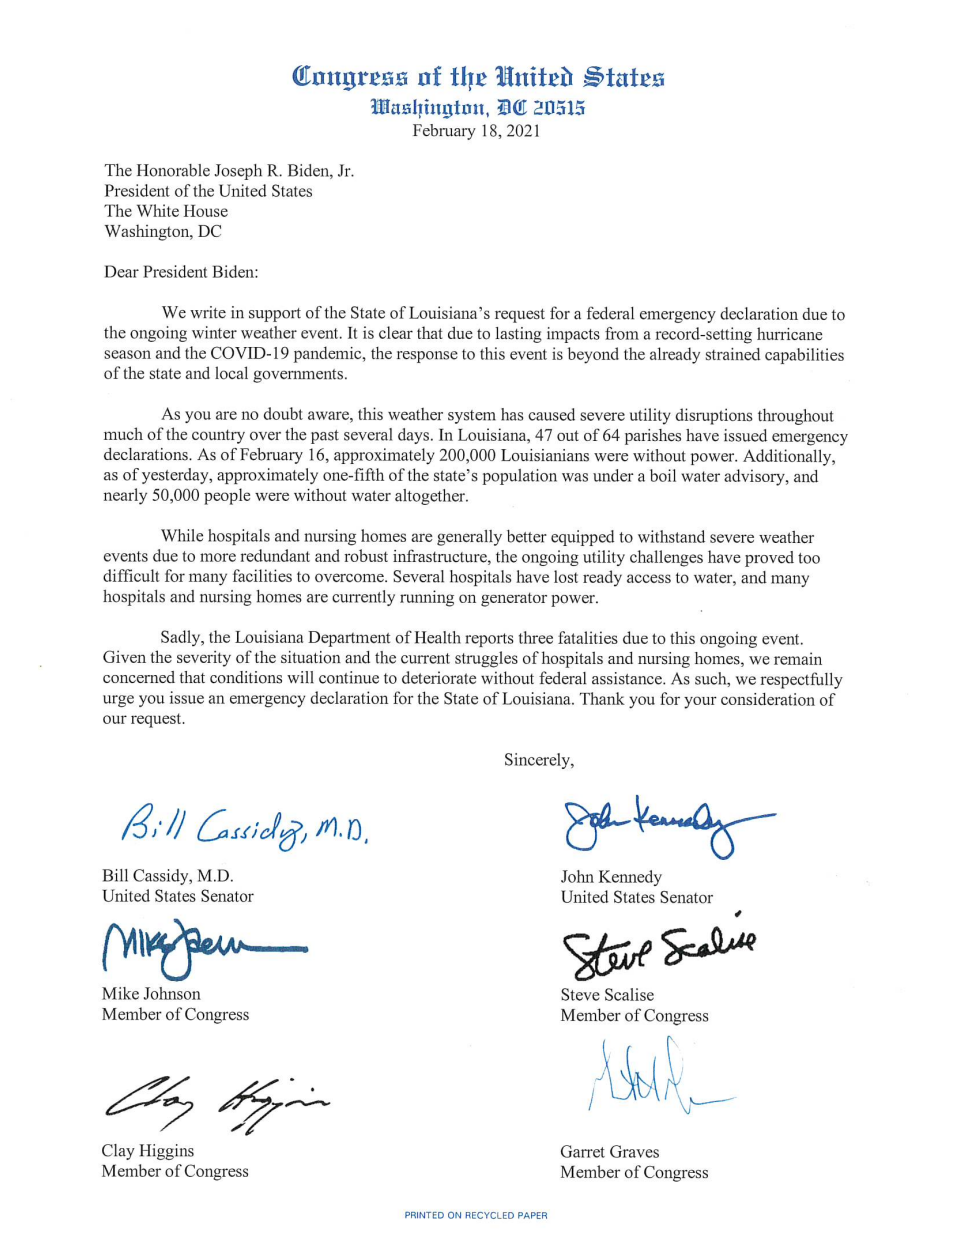 Letter to POTUS on Disaster Declaration